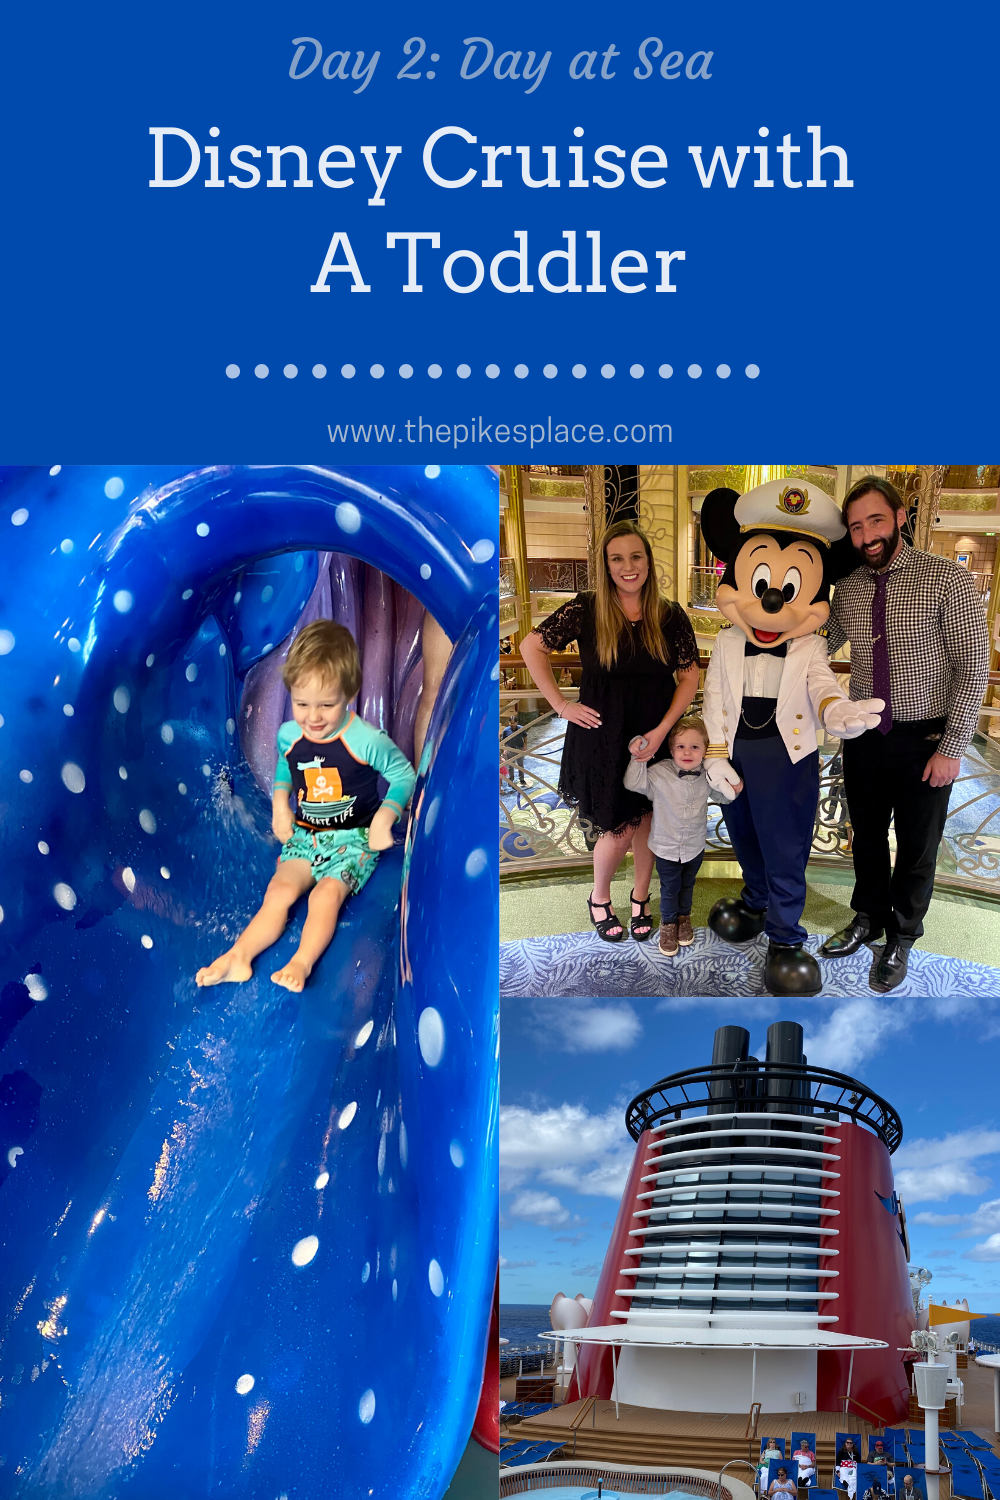 Disney Cruise with a Toddler Day 2